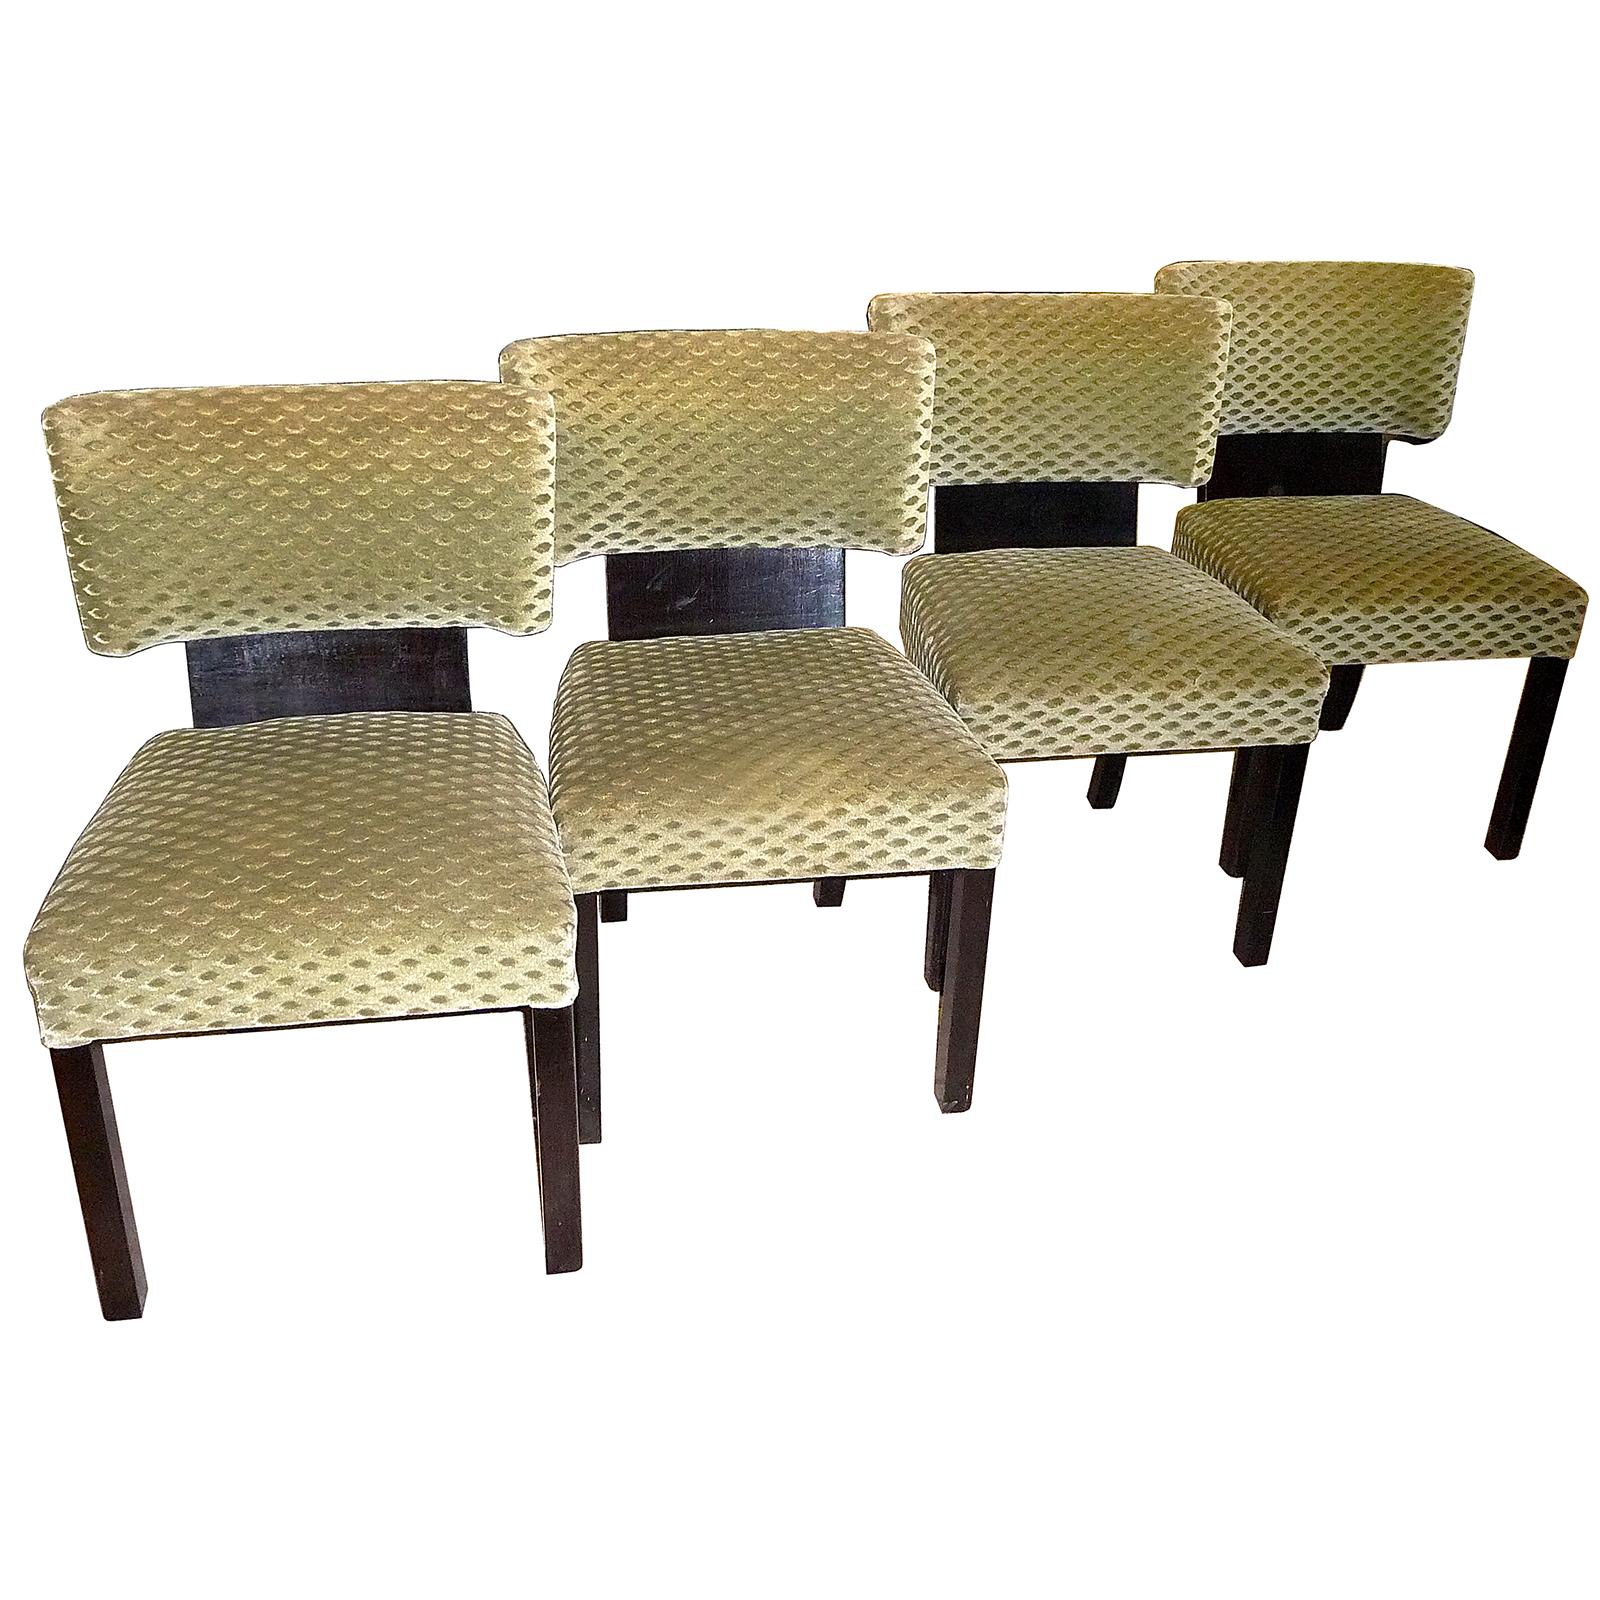 Set of four Art Deco dining room chairs. Bruno Paul design, Germany, circa 1930
Extraordinary and comfortable dining room chairs, Macassar veneer body with thick green velour upholstery.
Condition: Good original condition with normal wear of time,